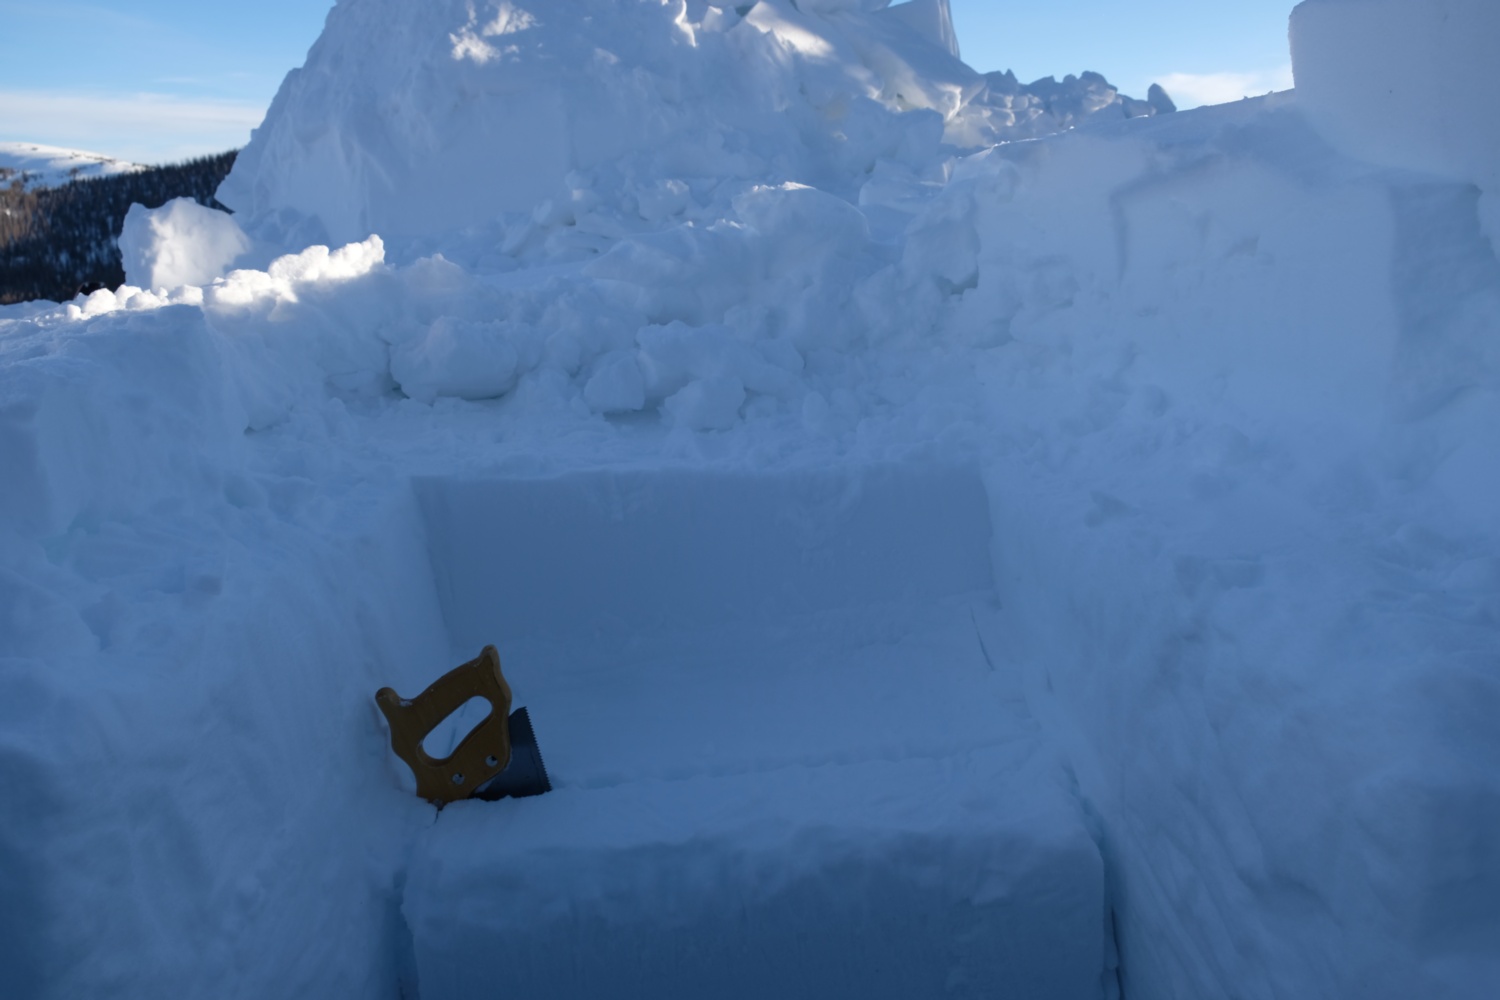 Starting to build a snow house.